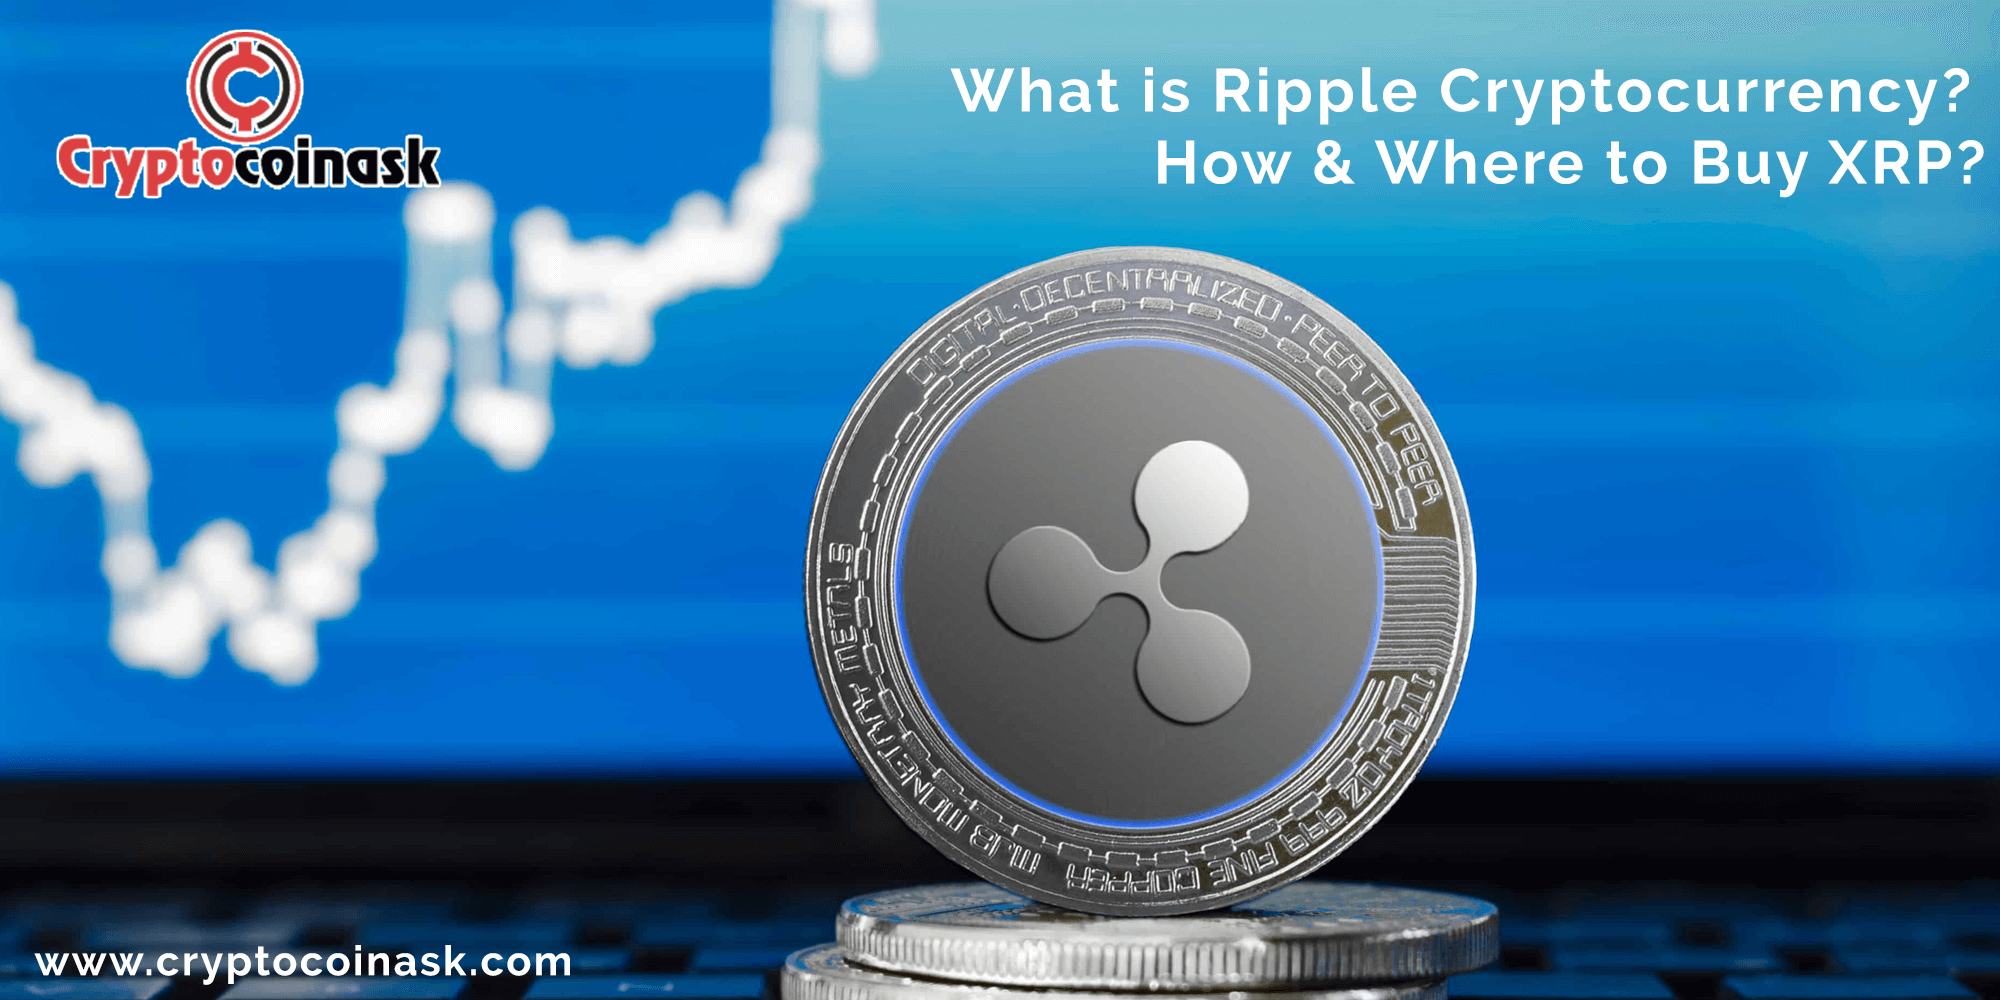 how to buy xrp from bitstamp